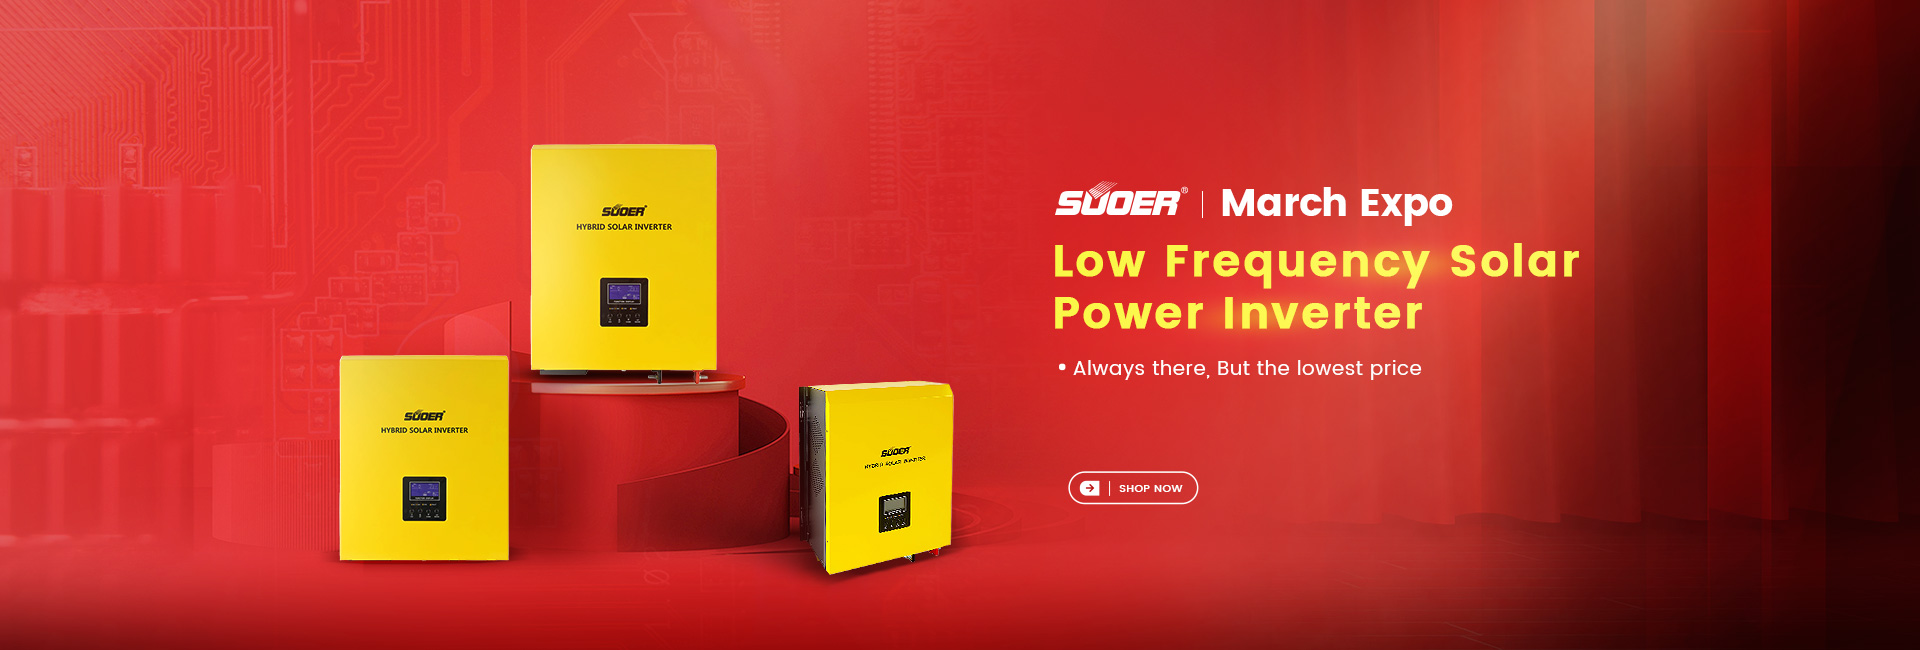 Low frequency solar power inverter